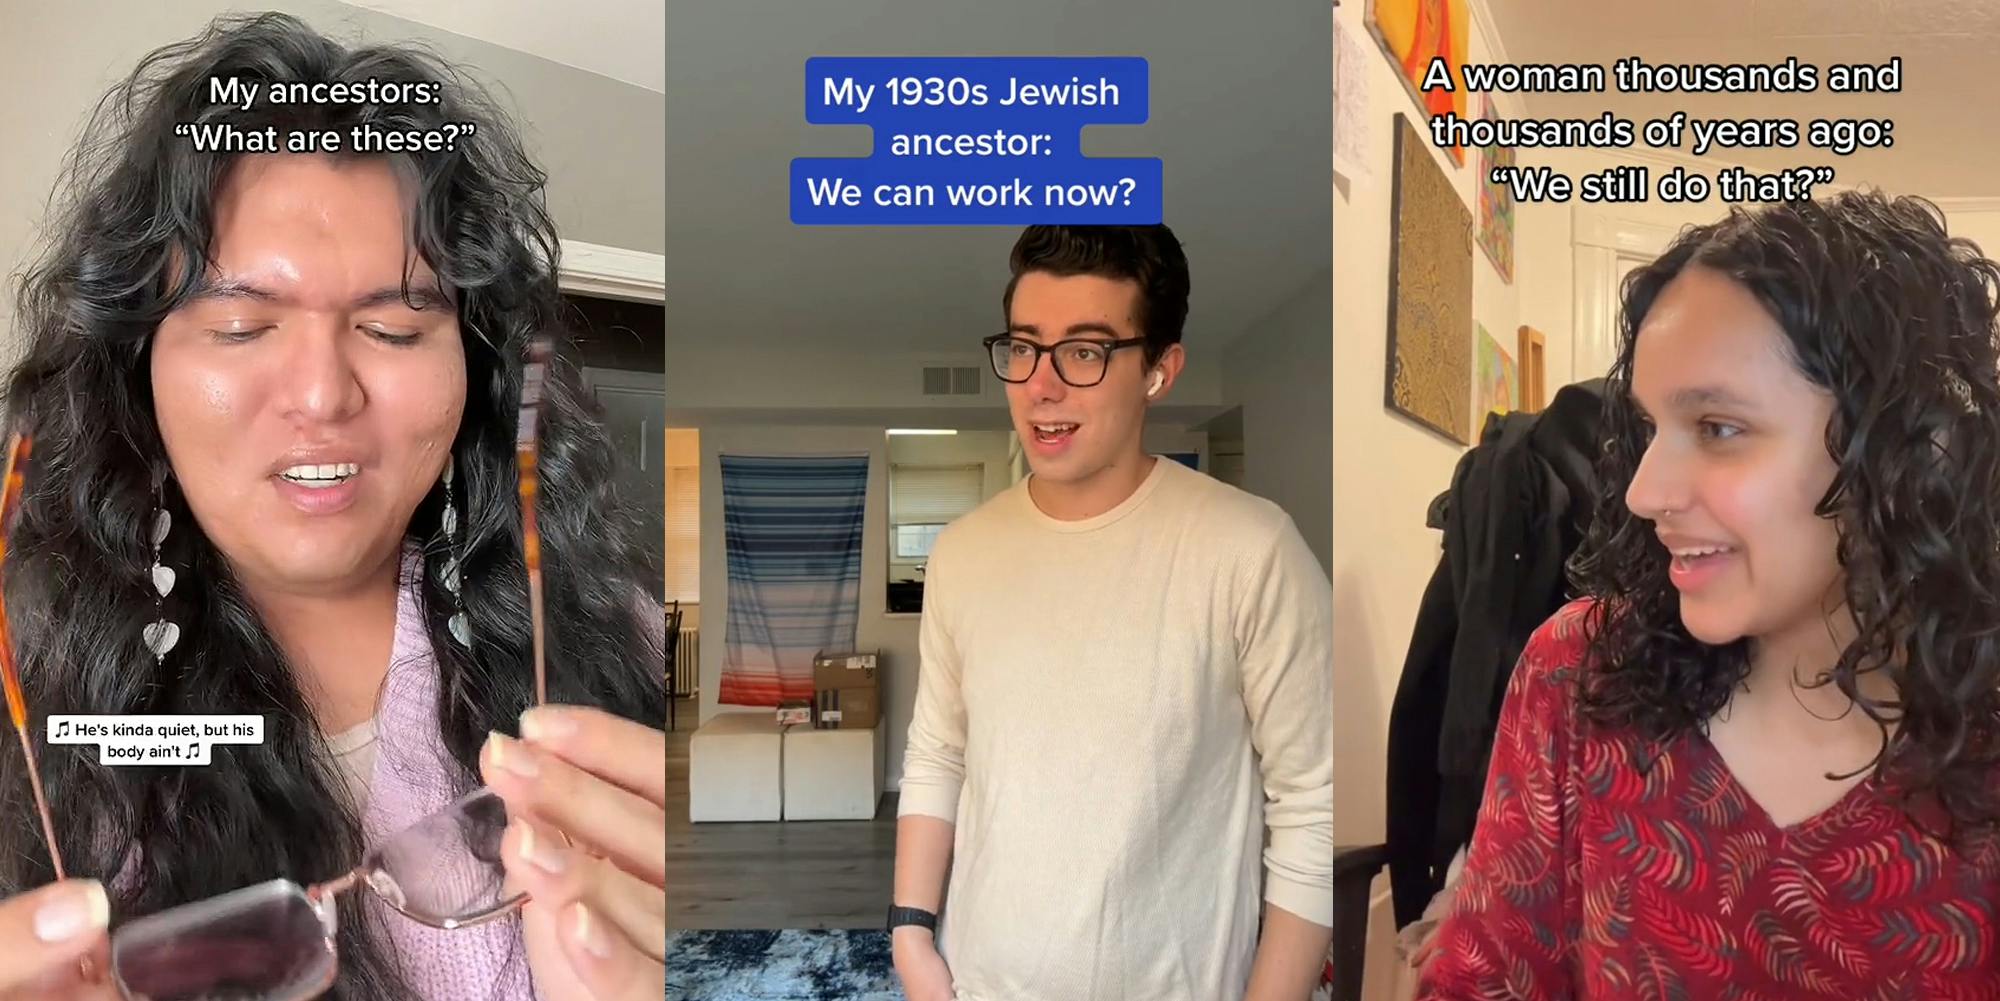 person holding glasses with caption "My ancestors: "What are these?" (l) person standing speaking with caption "My 1930 Jewish ancestor: We can work now?" (c) person looking left speaking with caption "A woman thousands of years ago: "We still do that?" (r)